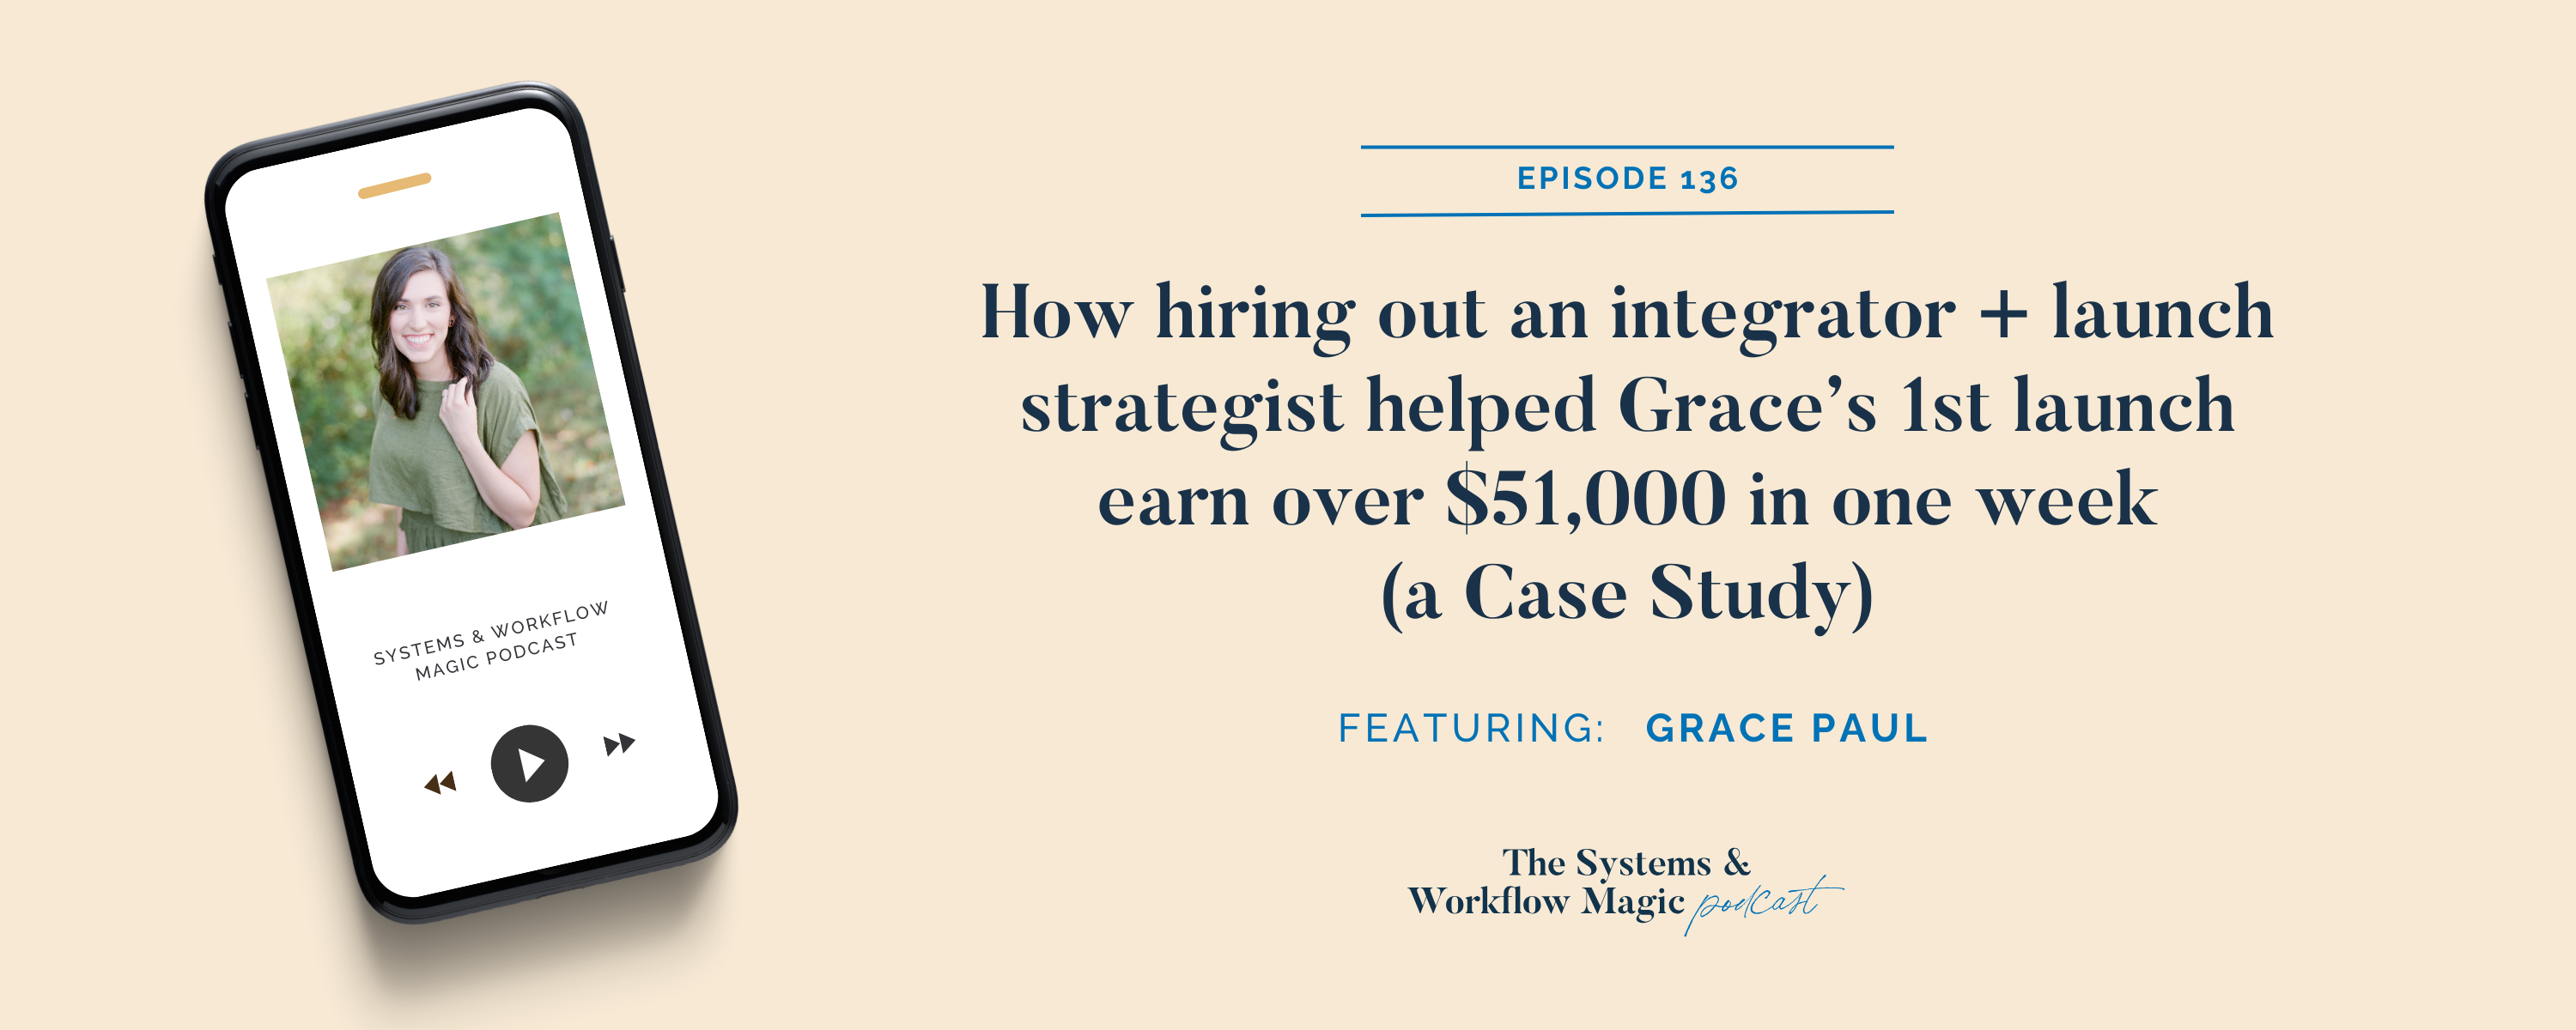 A-BLOG-BANNER-WITH-TEXT-THAT-STATES-HOW-HIRING-OUT-AN-INTEGRATOR-AND-LAUNCH-STRATEGIST-HELPED-GRACE-PAULS-1ST-LAUNCH-EARN-OVER-51000-IN-ONE-WEEK-A-CASE-STUDY